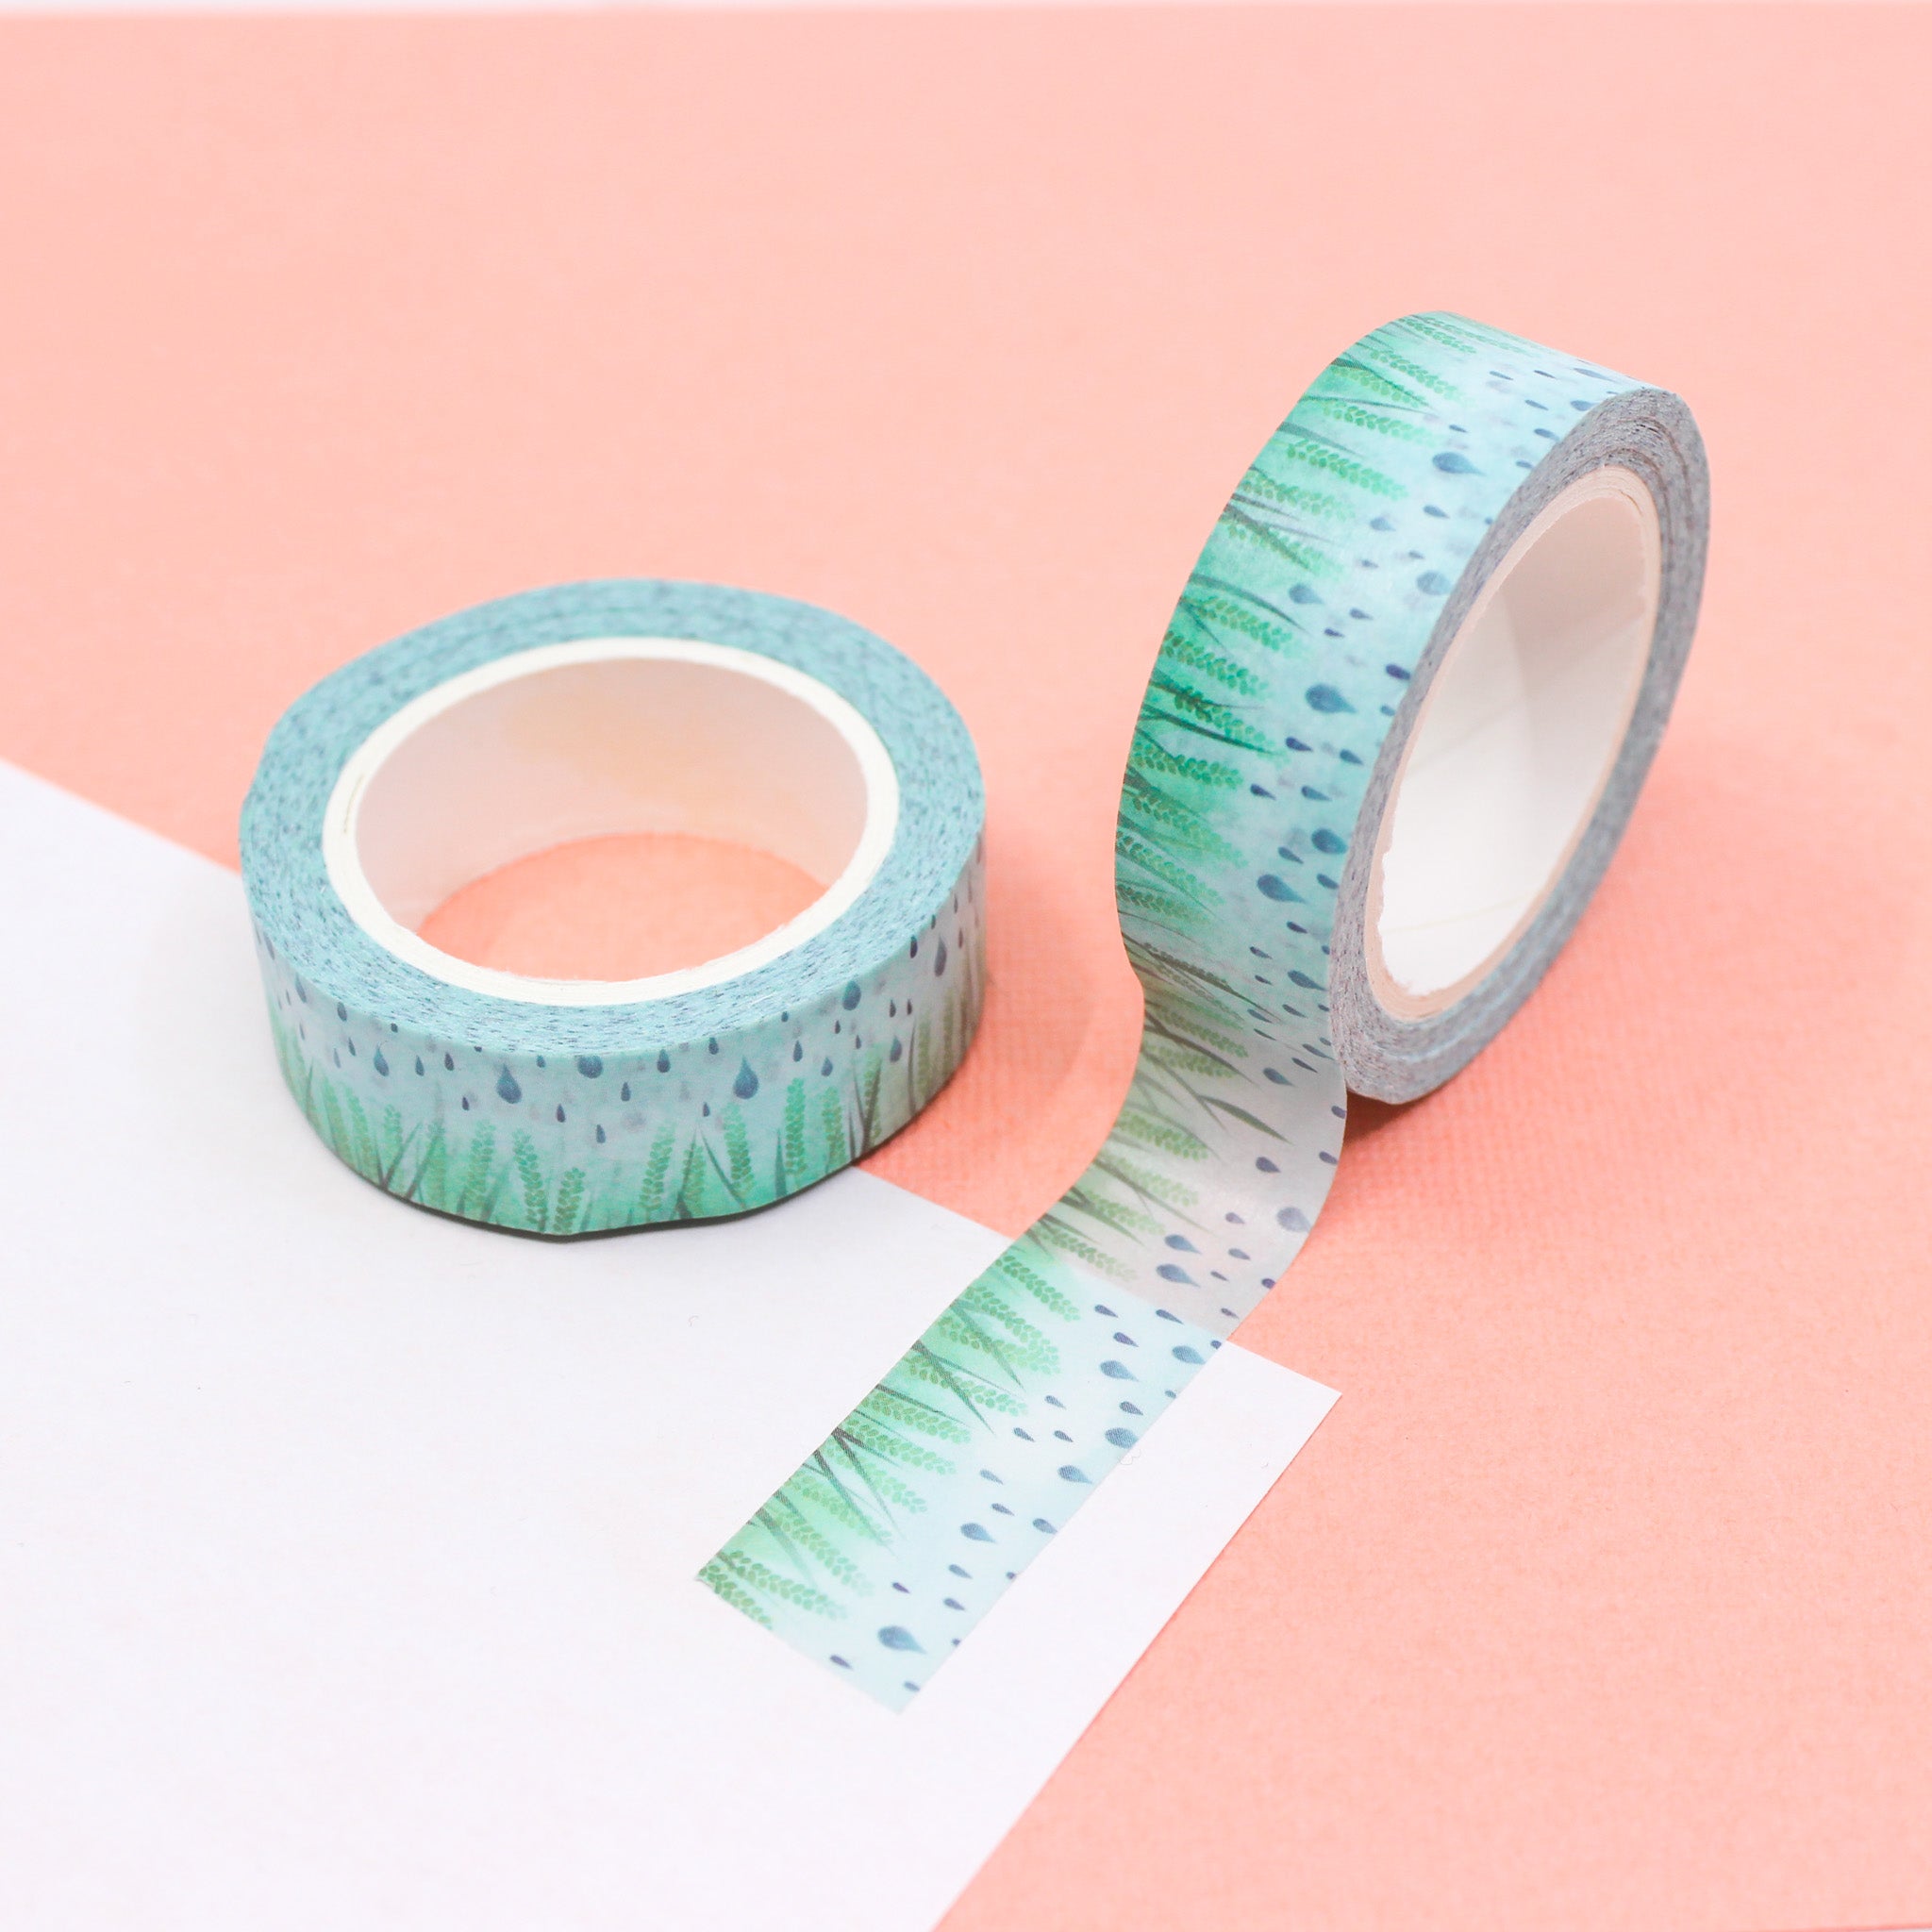 This a sweet Nordic green grass pattern washi tape from BBB Supplies Craft Shop